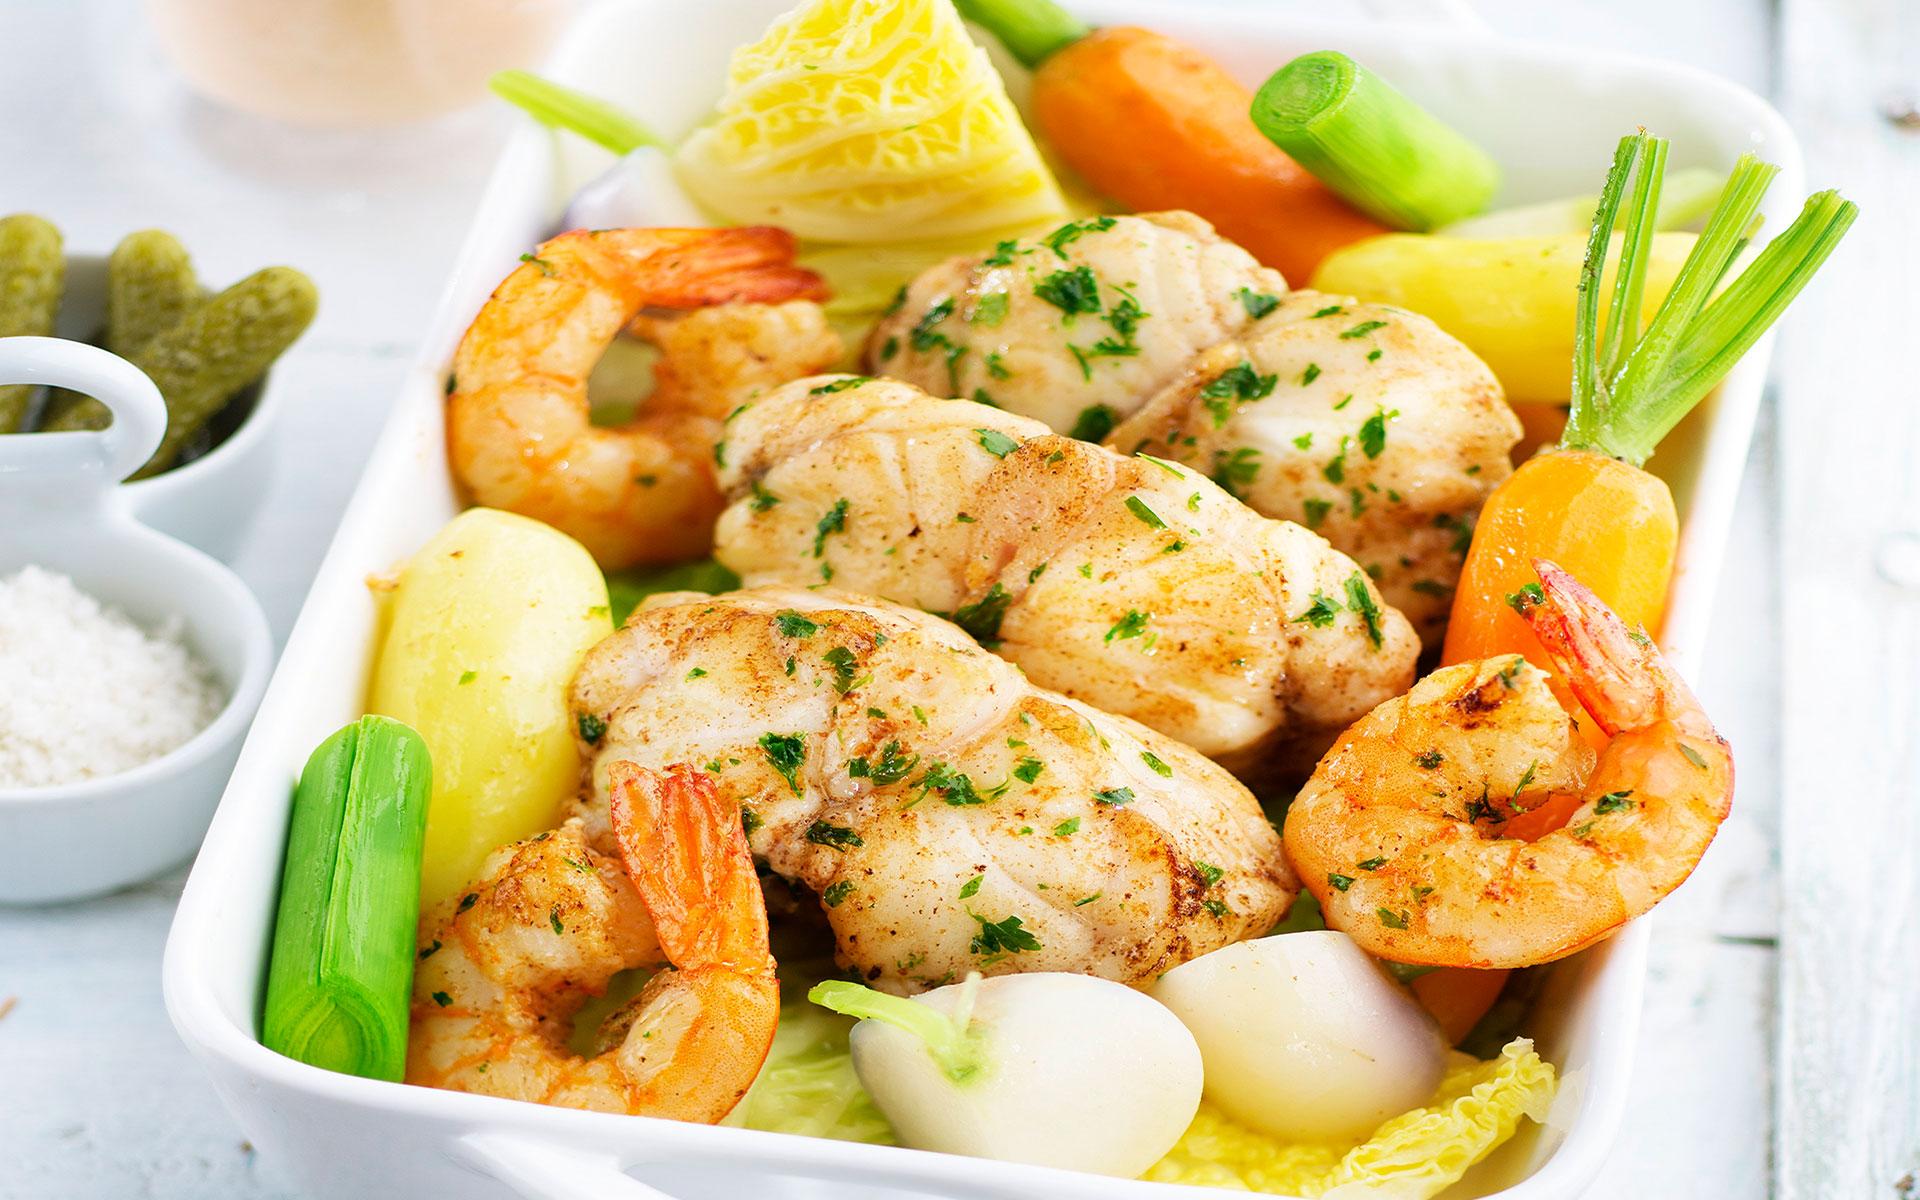 Easy Slow Cooker Seafood Pot Au Feu For A French-Inspired Meal